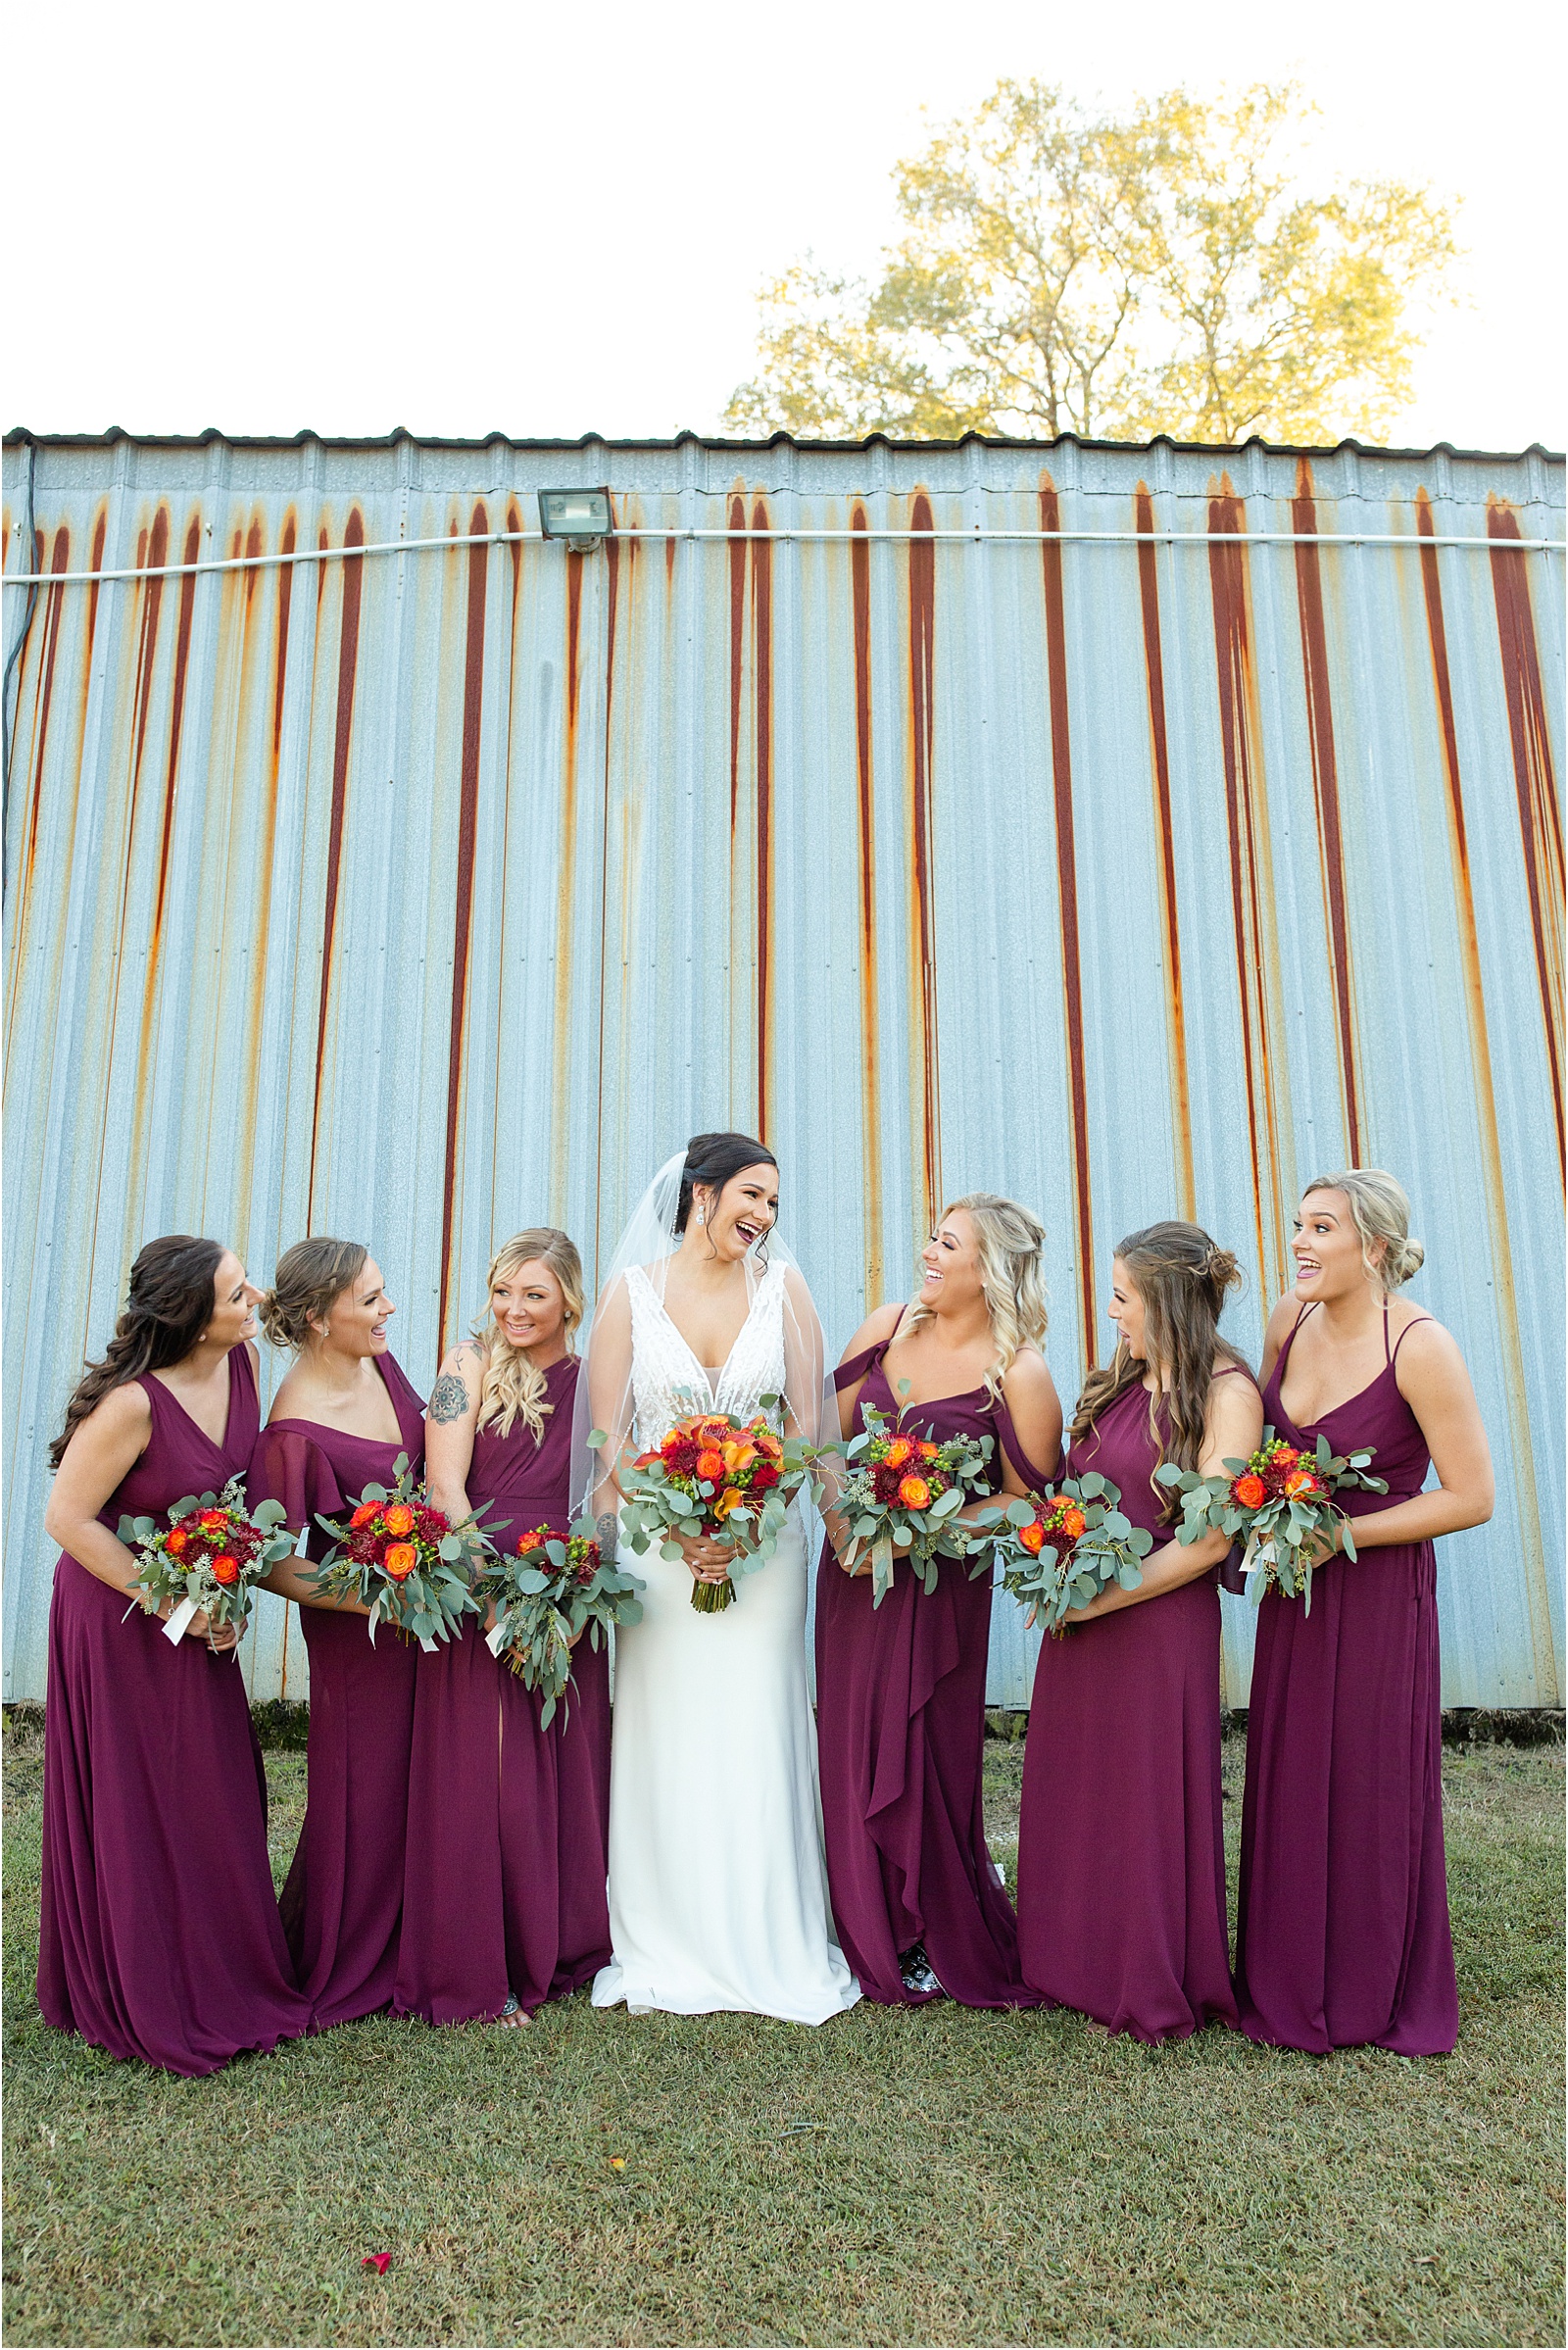 woman in wedding gown holds flowers while standing with her girlfriends